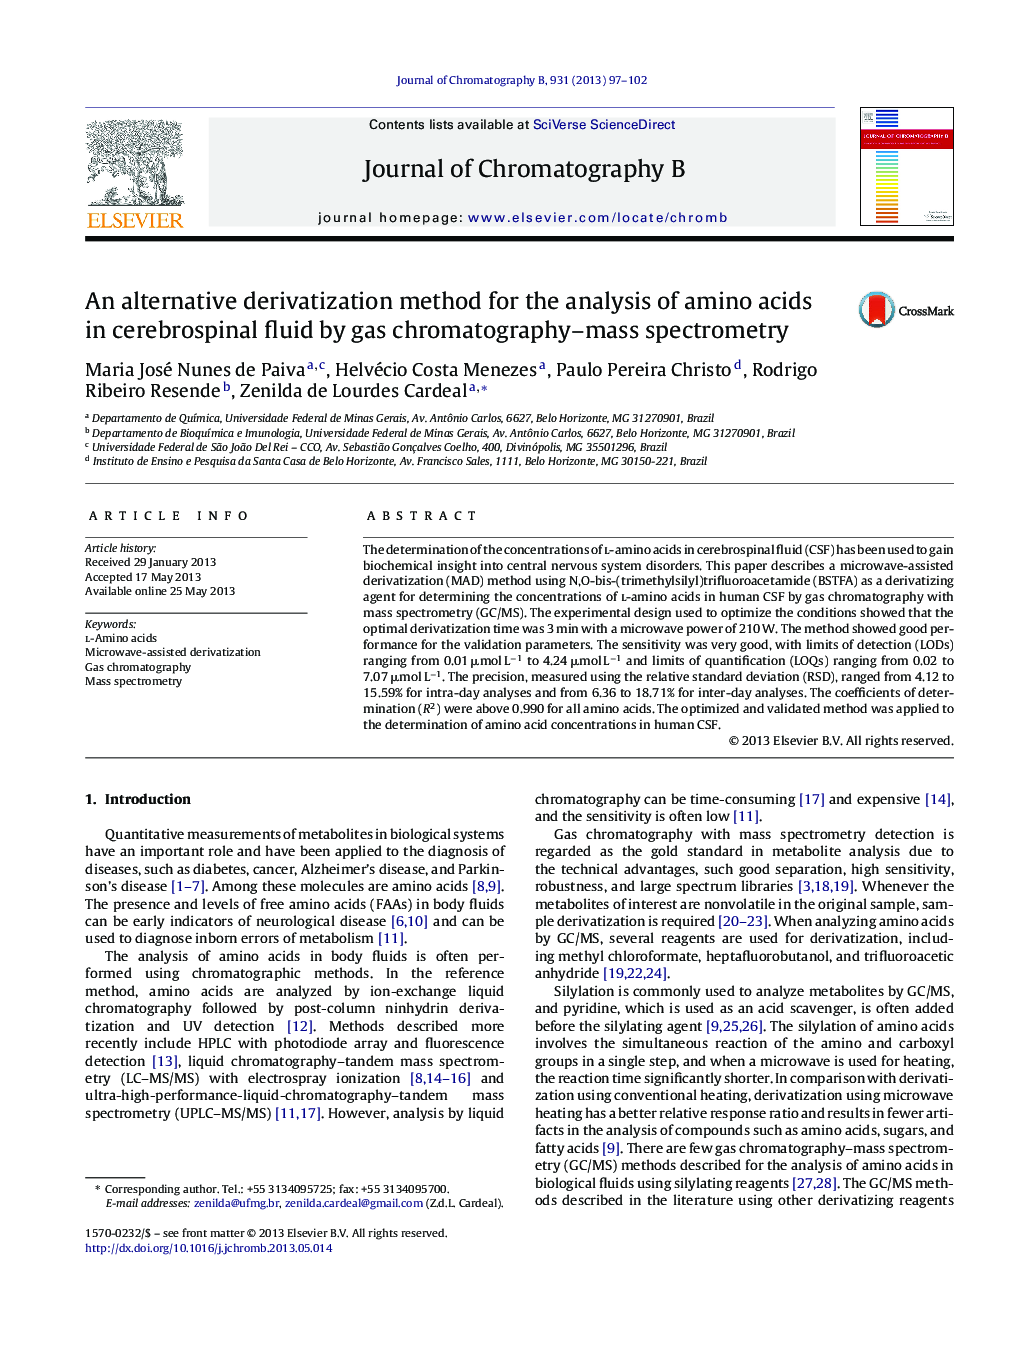 An alternative derivatization method for the analysis of amino acids in cerebrospinal fluid by gas chromatography–mass spectrometry